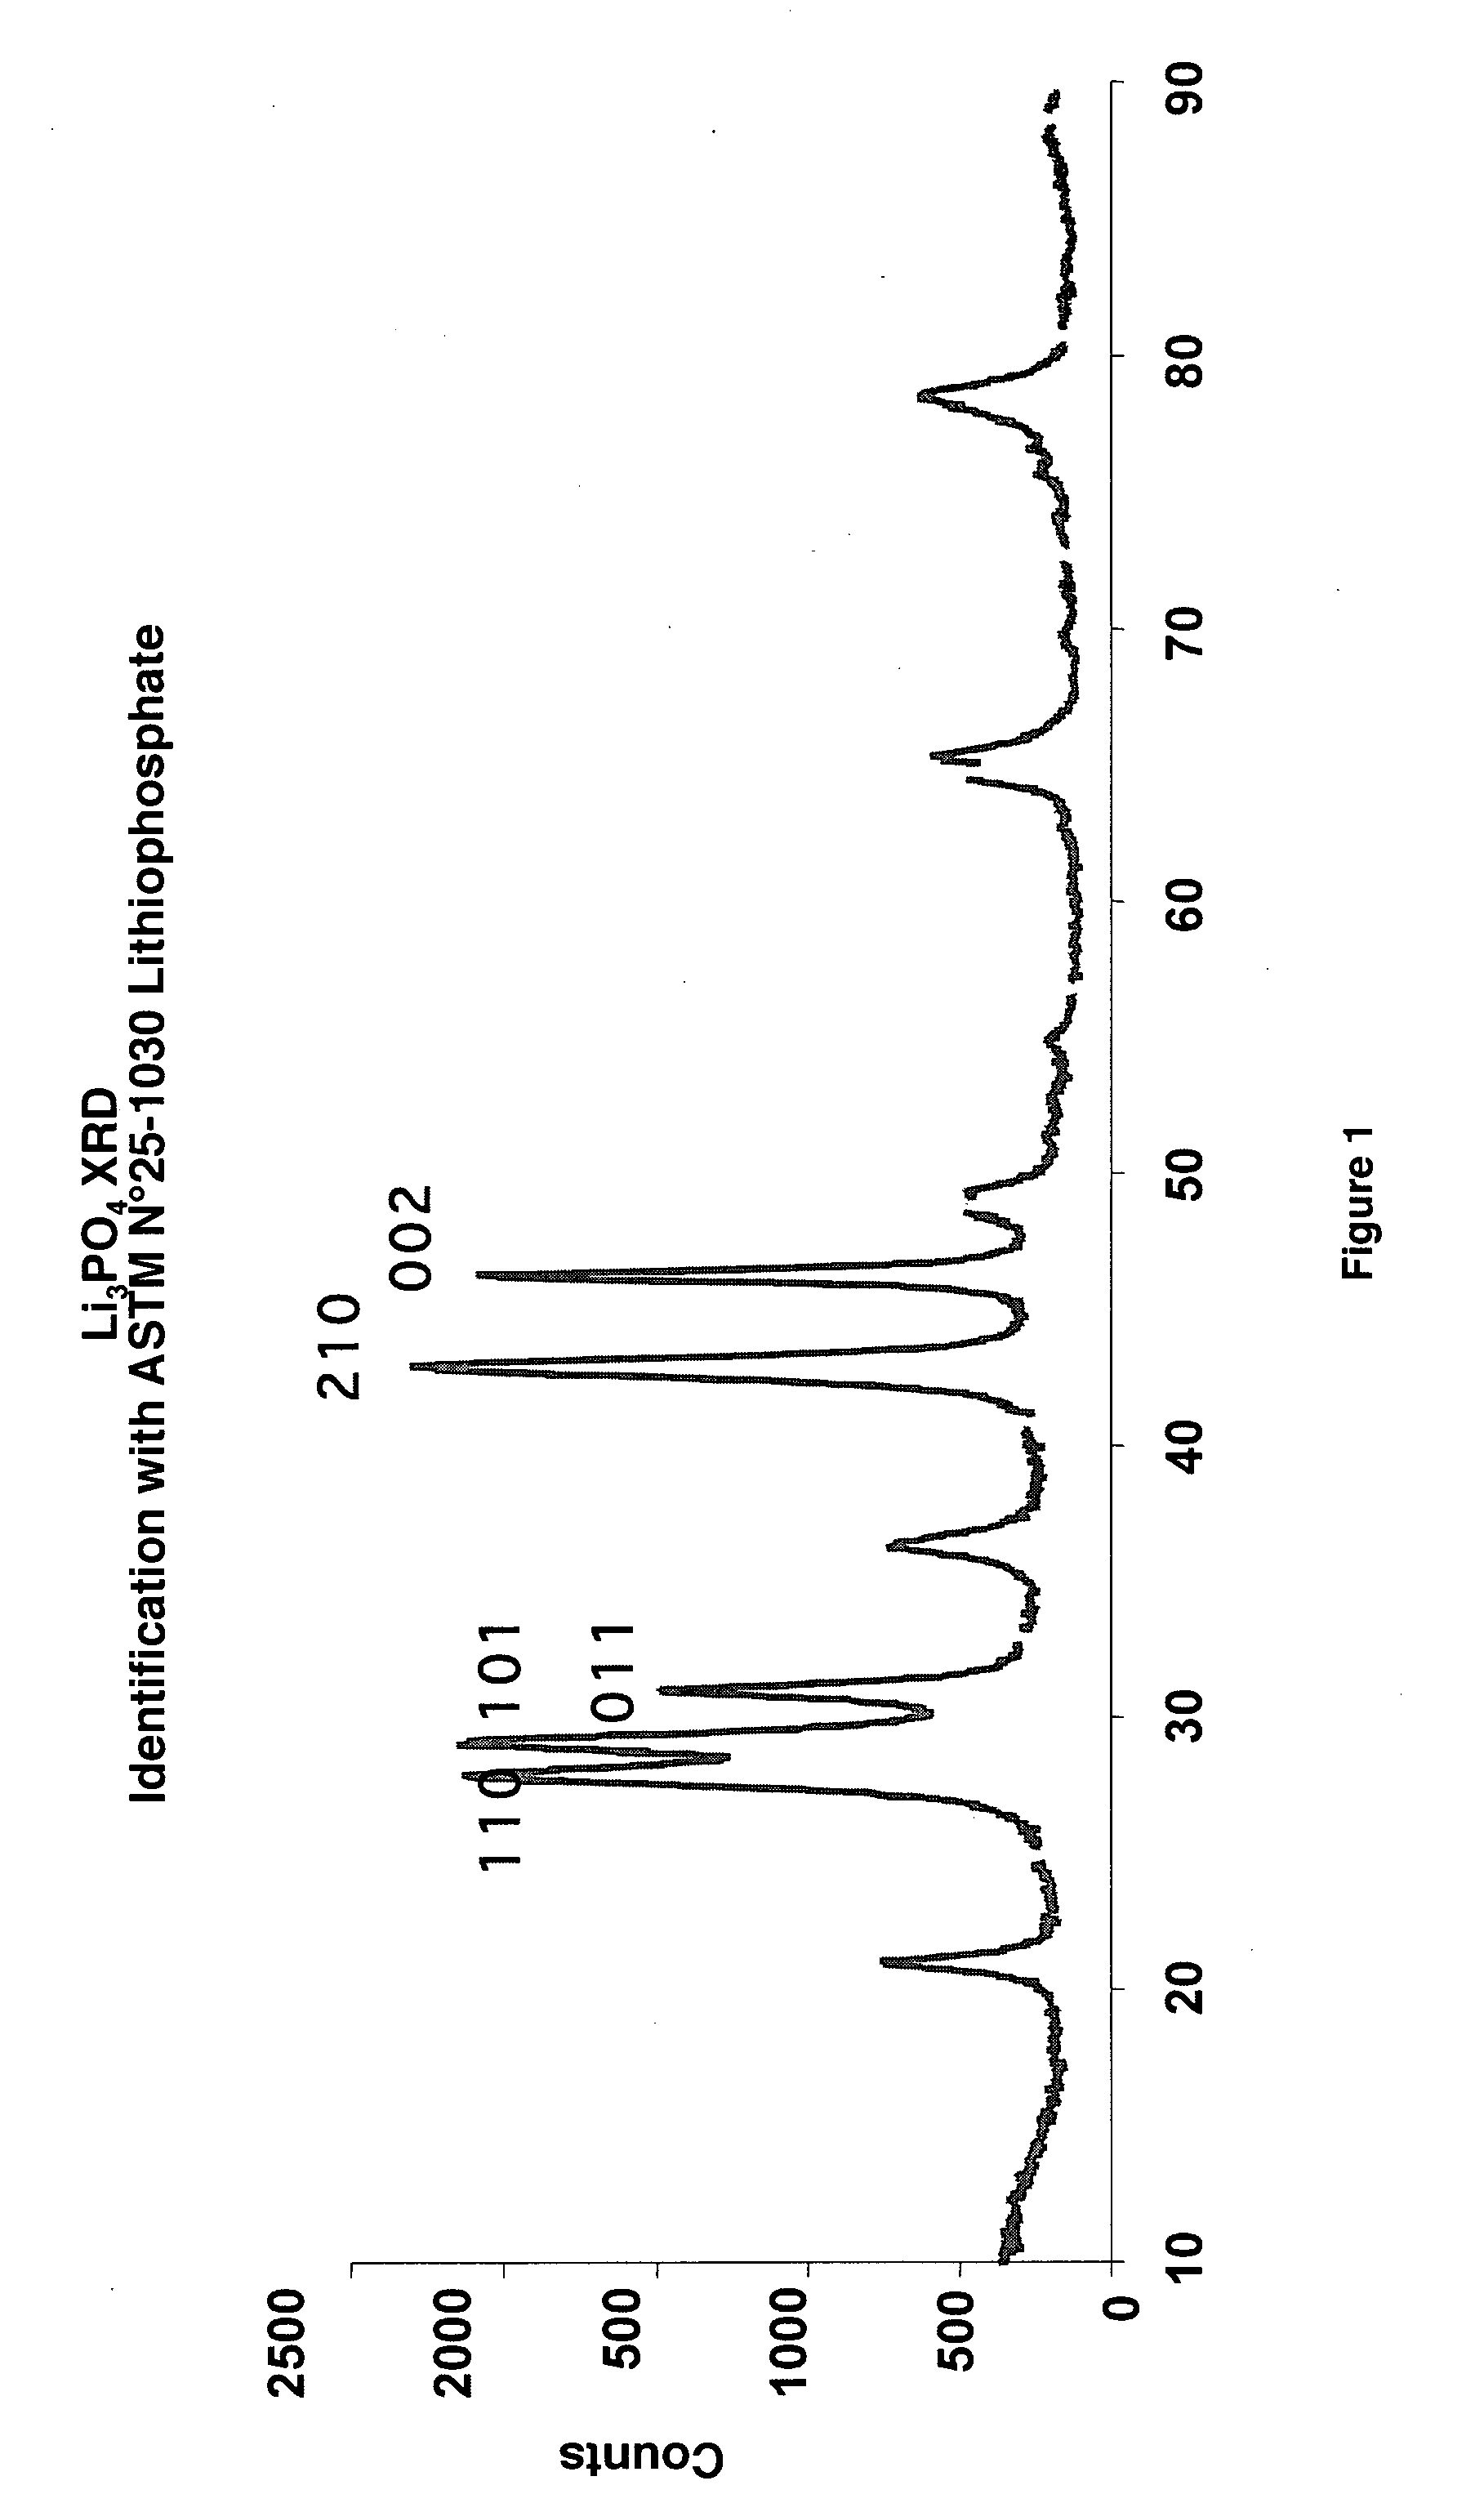 Method for the mixed recycling of lithium-based anode batteries and cells